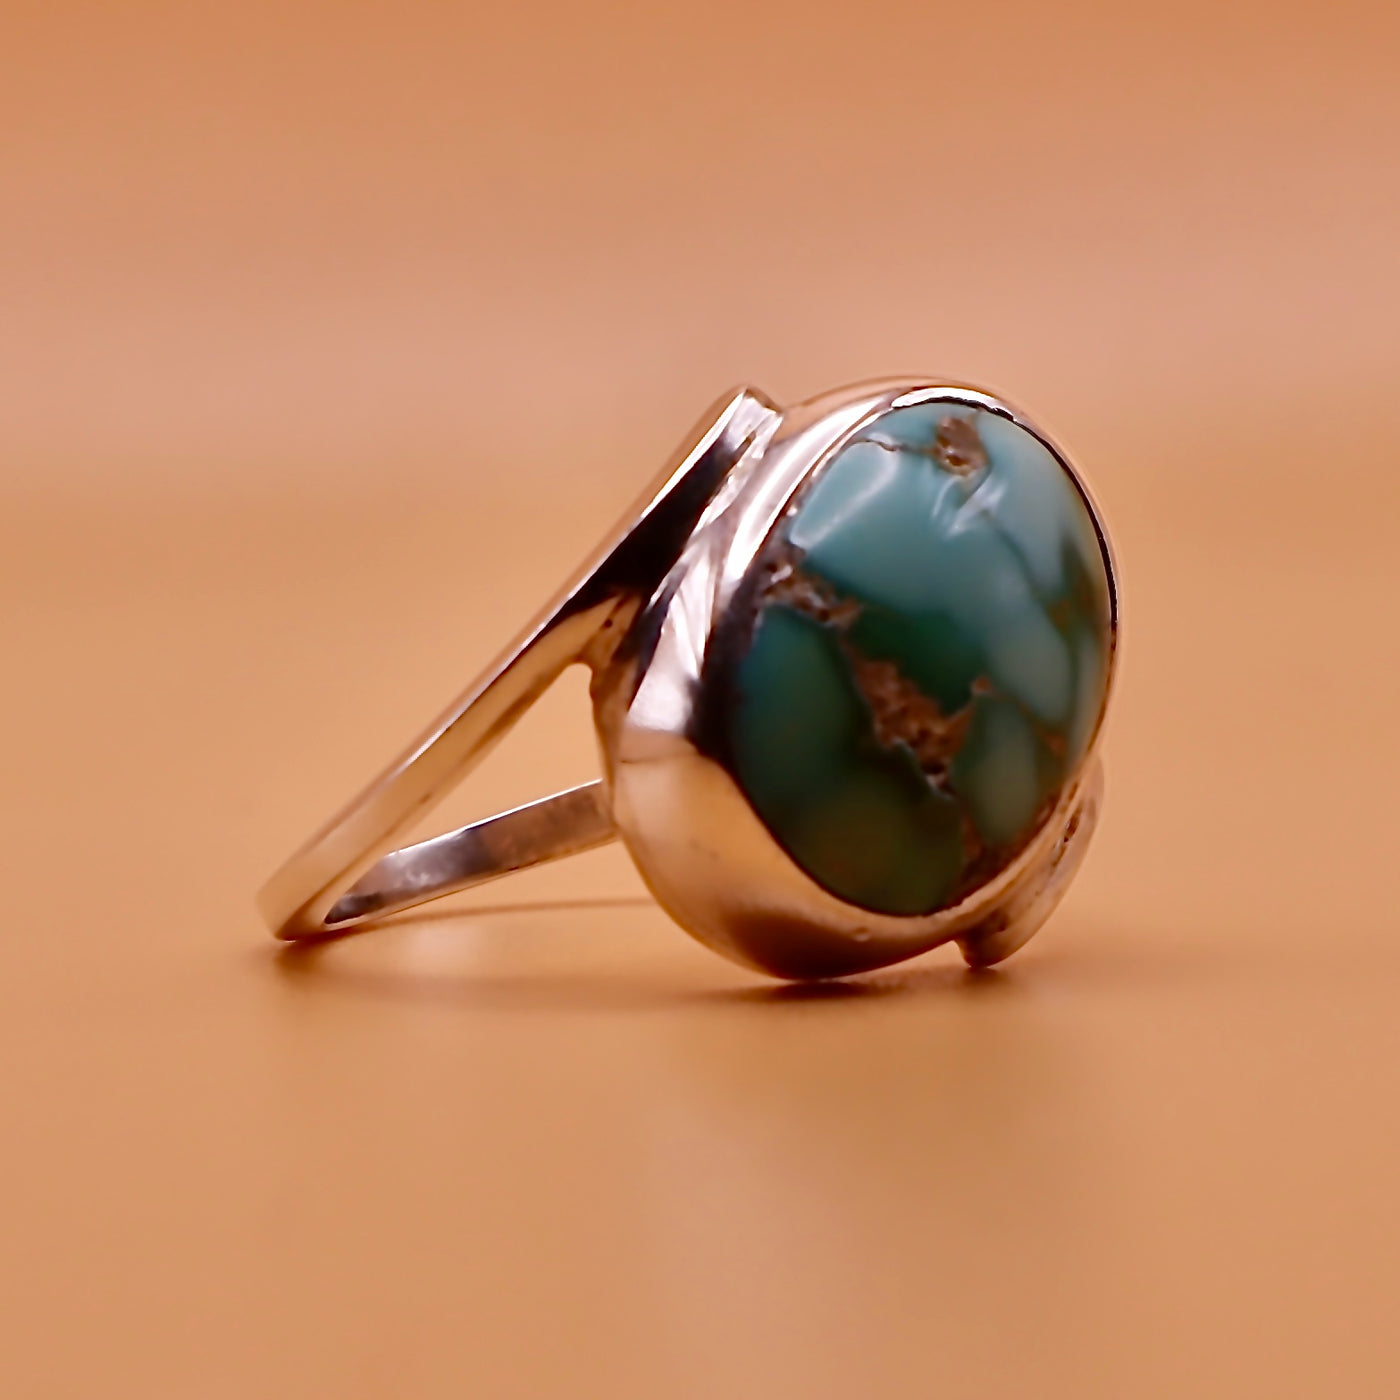 Nishapuri Feroza Ring for Ladies | Genuine Persian Turquoise Sterling Silver Ring with Unisex US Size 7.5 - AlAliGems